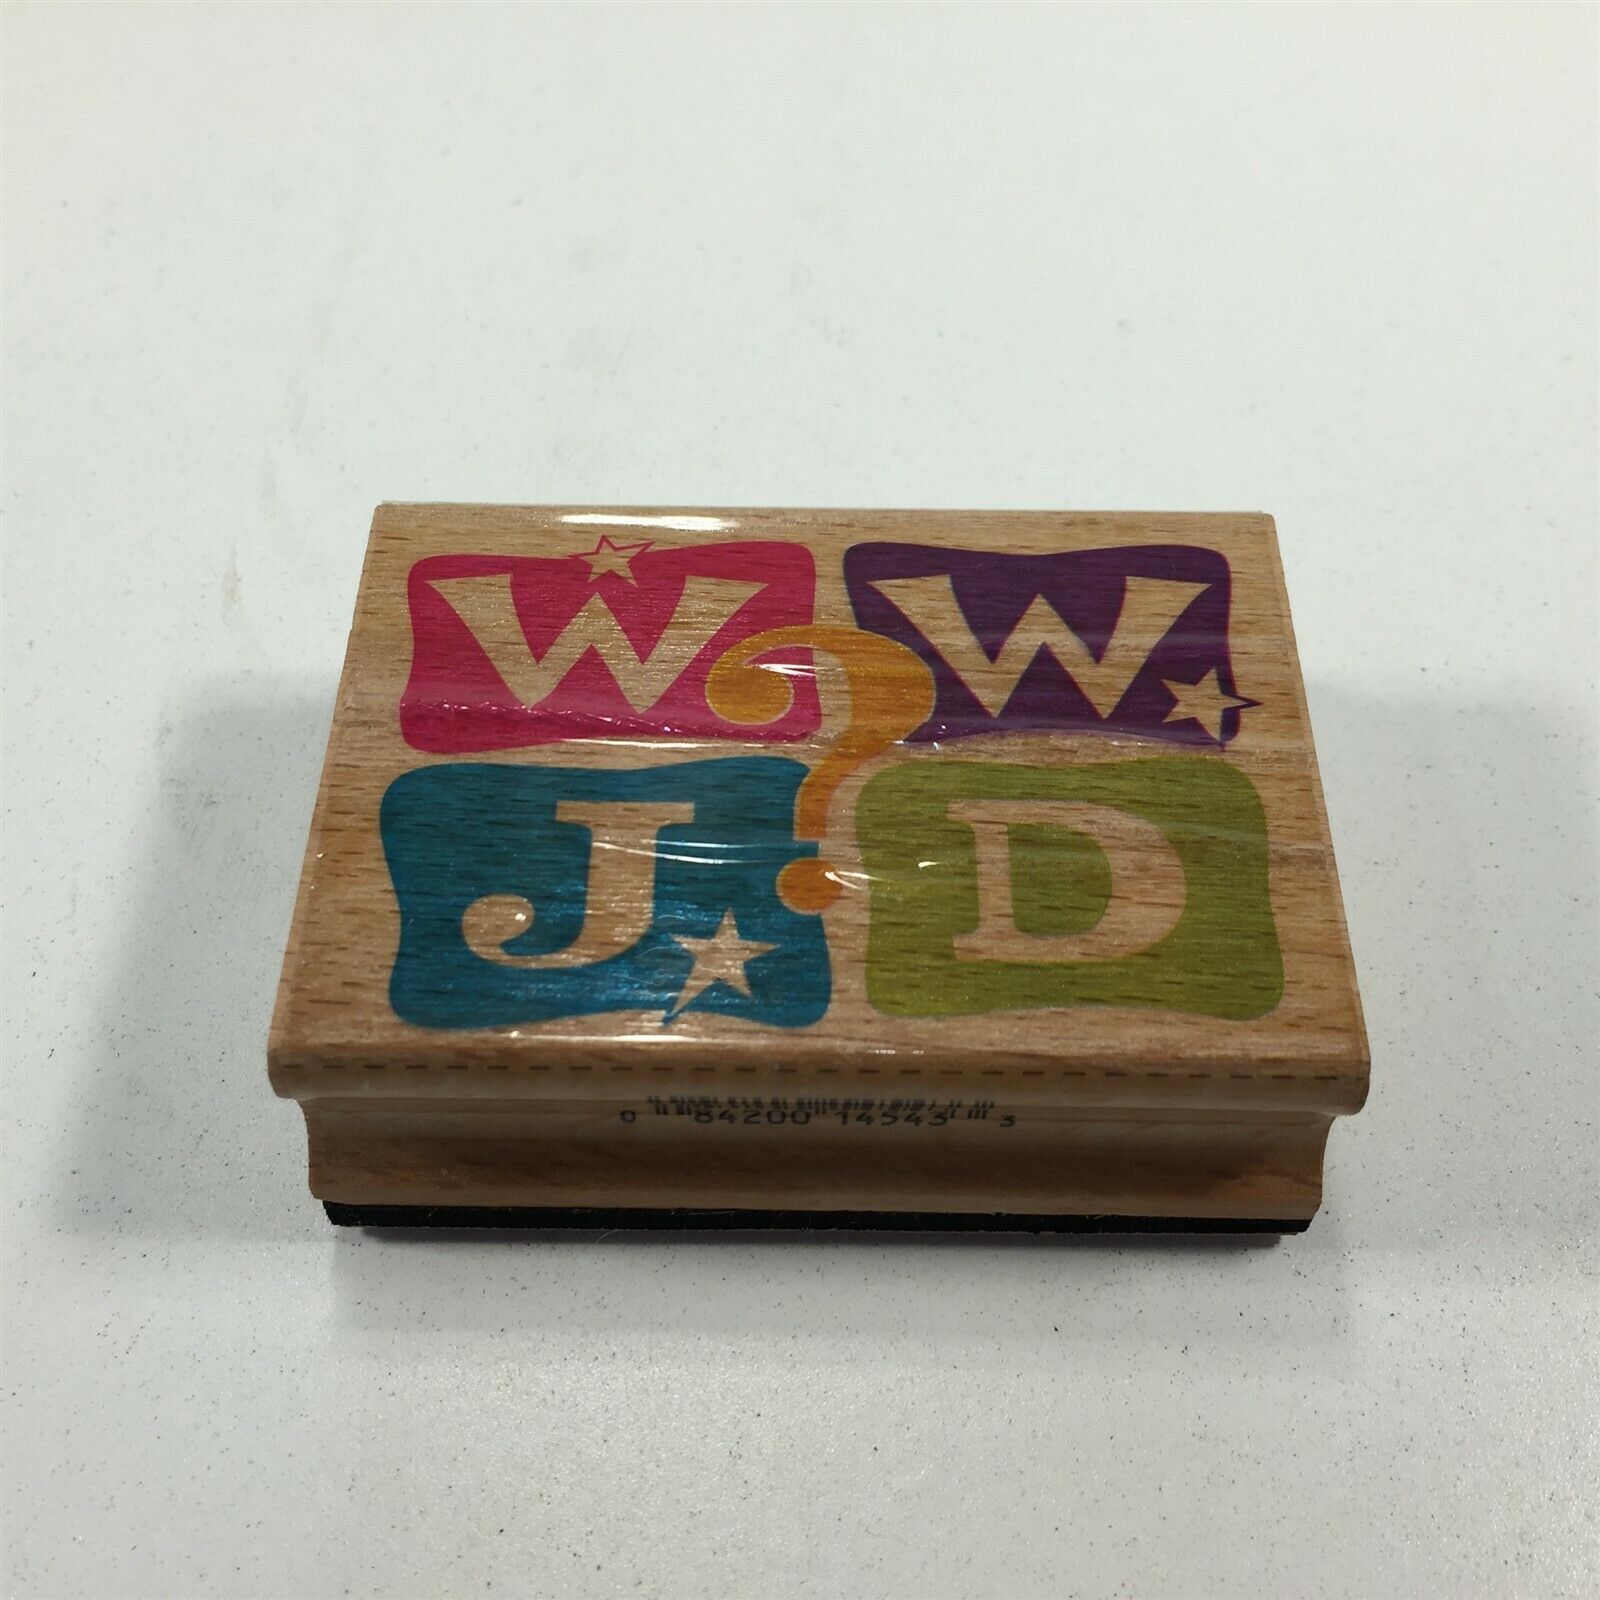 Primary image for Stampcraft WWJD Theme Rubber Stamp 440H13